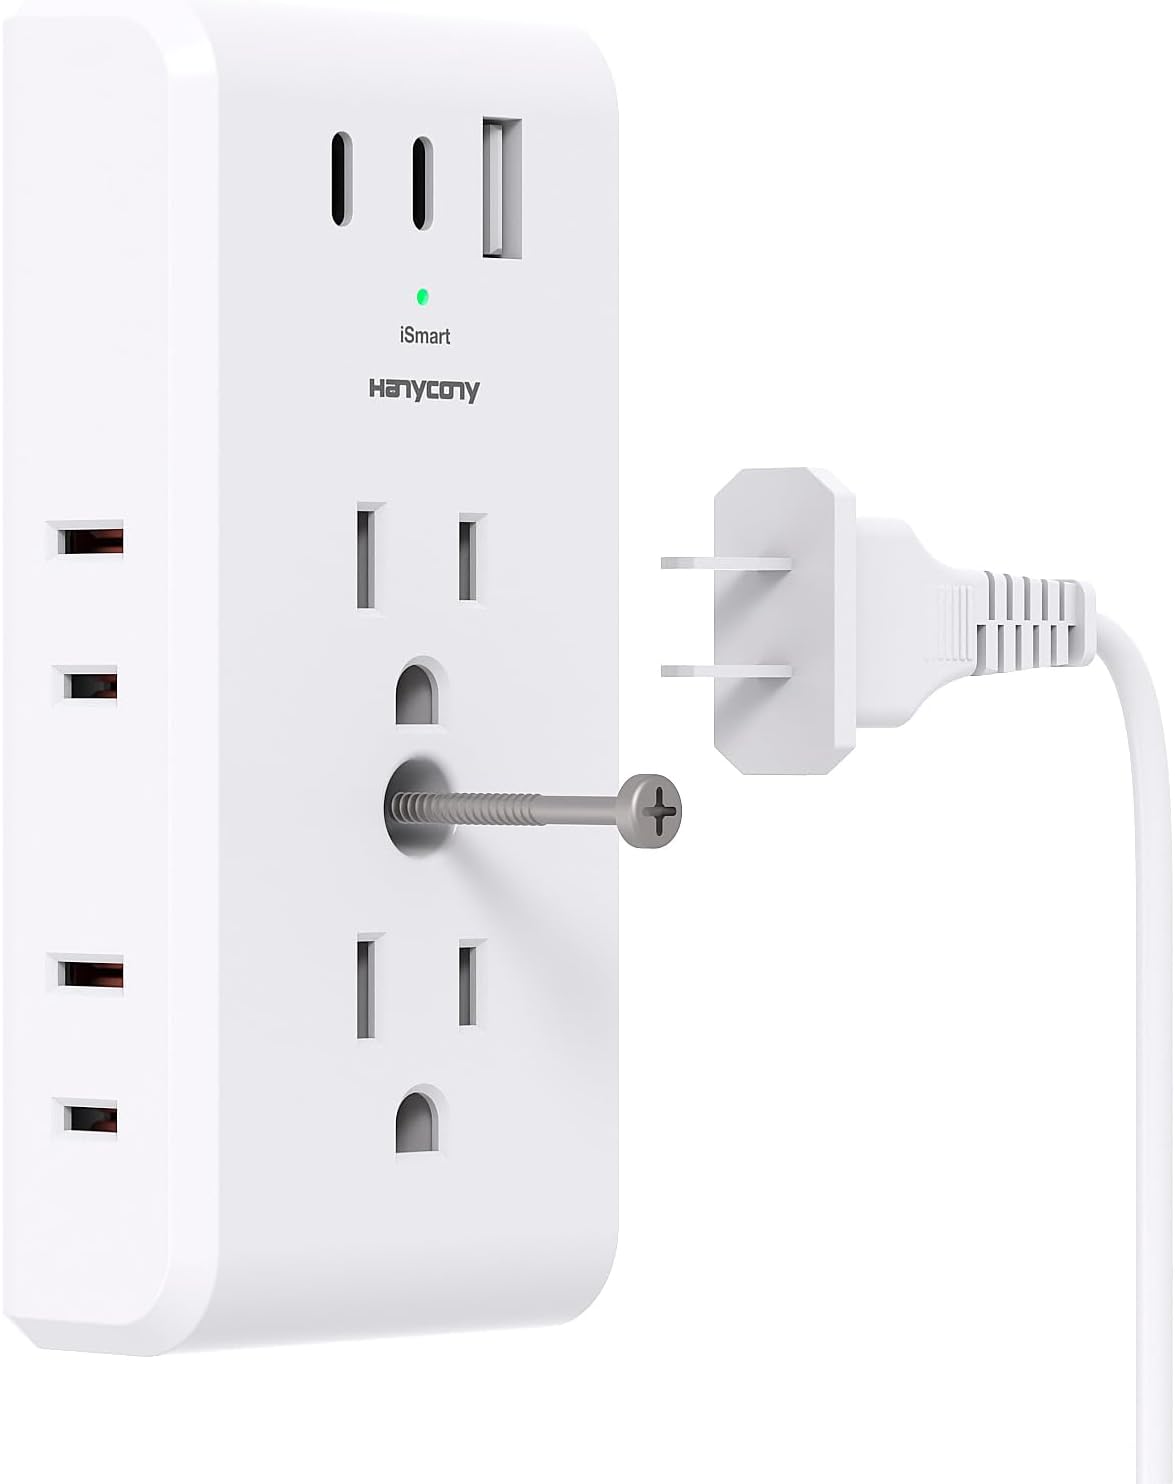 Multi Plug Outlet Extender, 6 Electrical Outlet Splitter with 3 USB Ports(2 USB C), Power Strip Multiple Wall Outlet Adapter Expander for Home Office Travel Cruise College Dorm Room Essentials, White